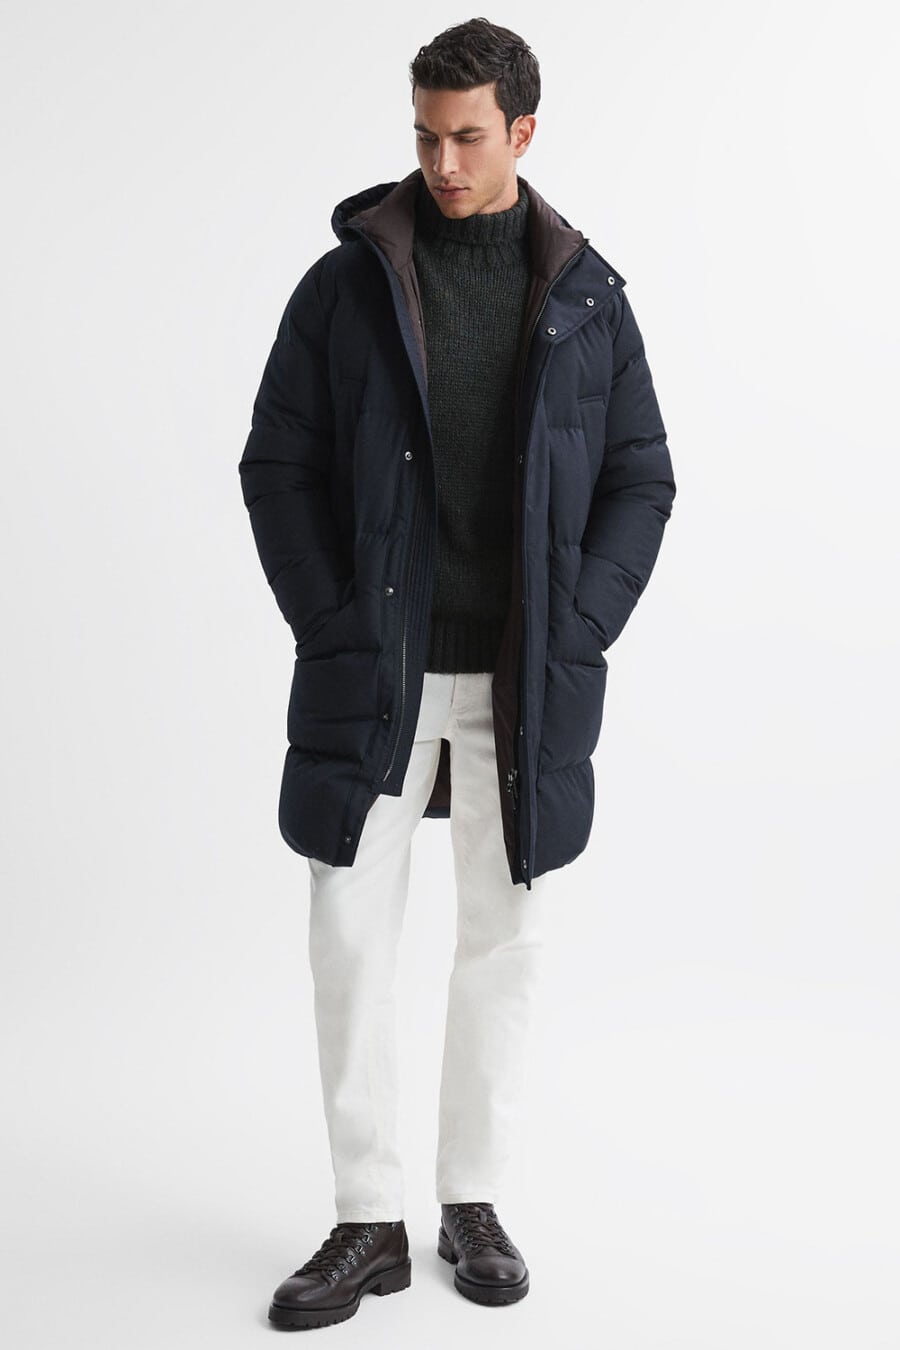 Men's white jeans, chunky charcoal turtleneck, navy long puffer jacket and brown leather hiking boots outfit